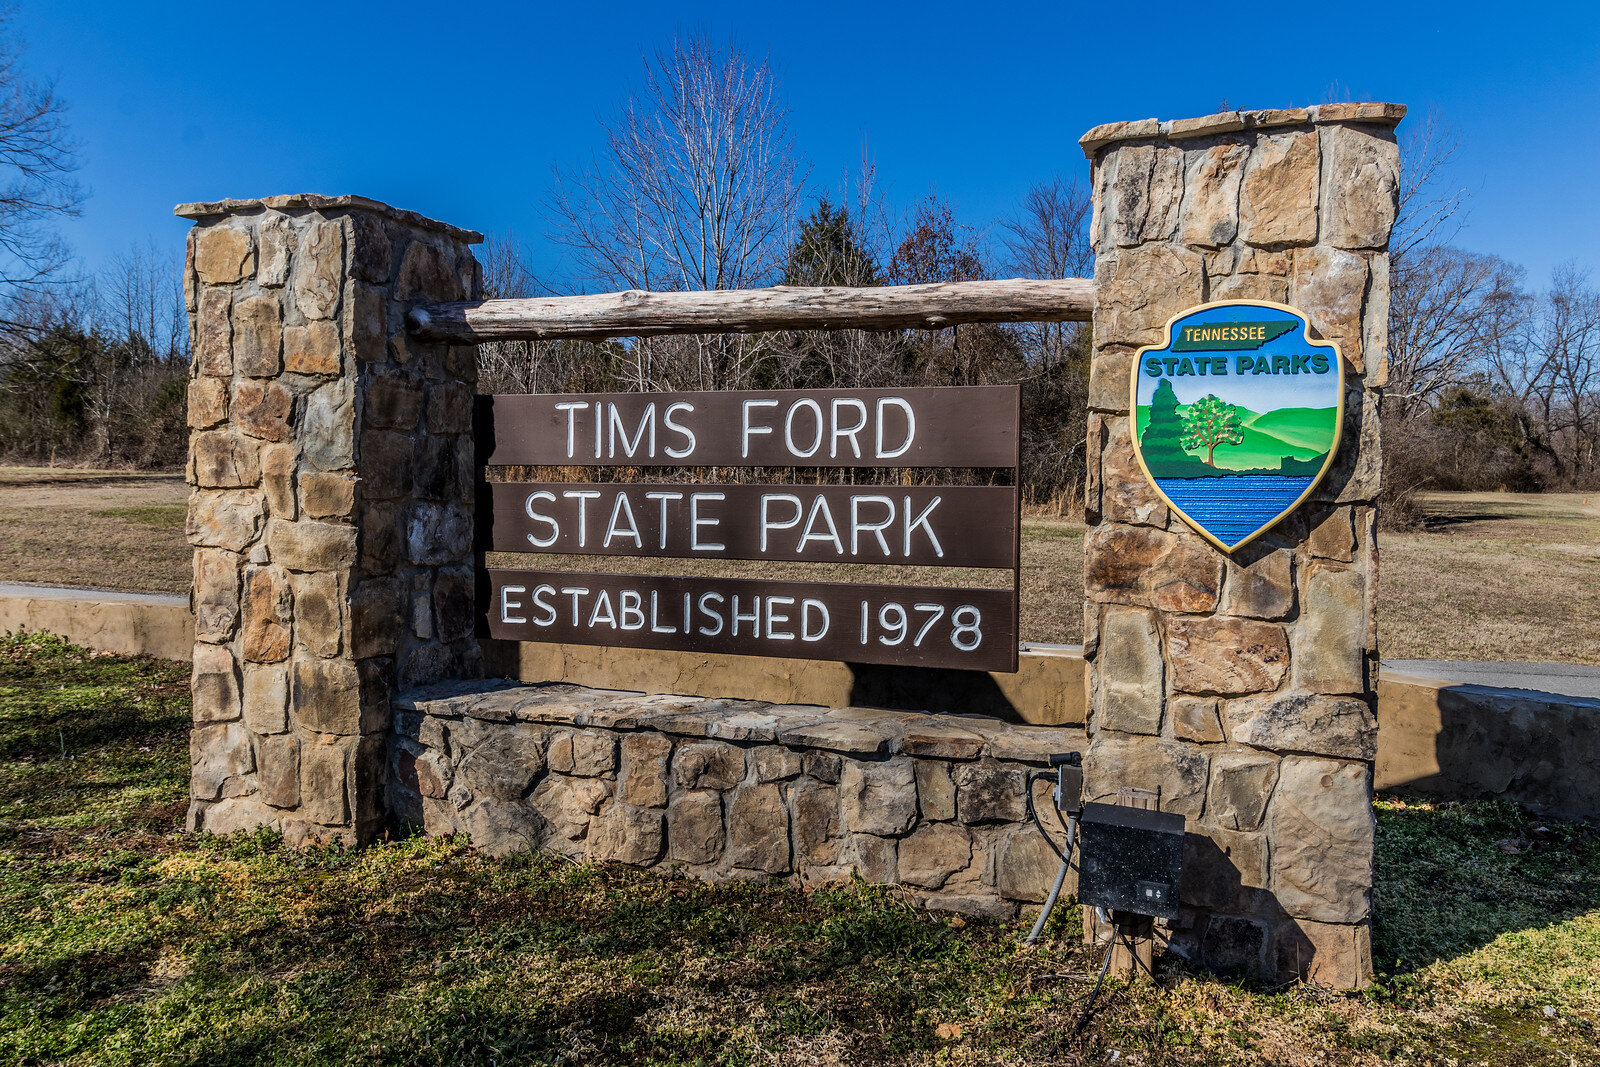 tims-ford-state-park-entrance.jpg